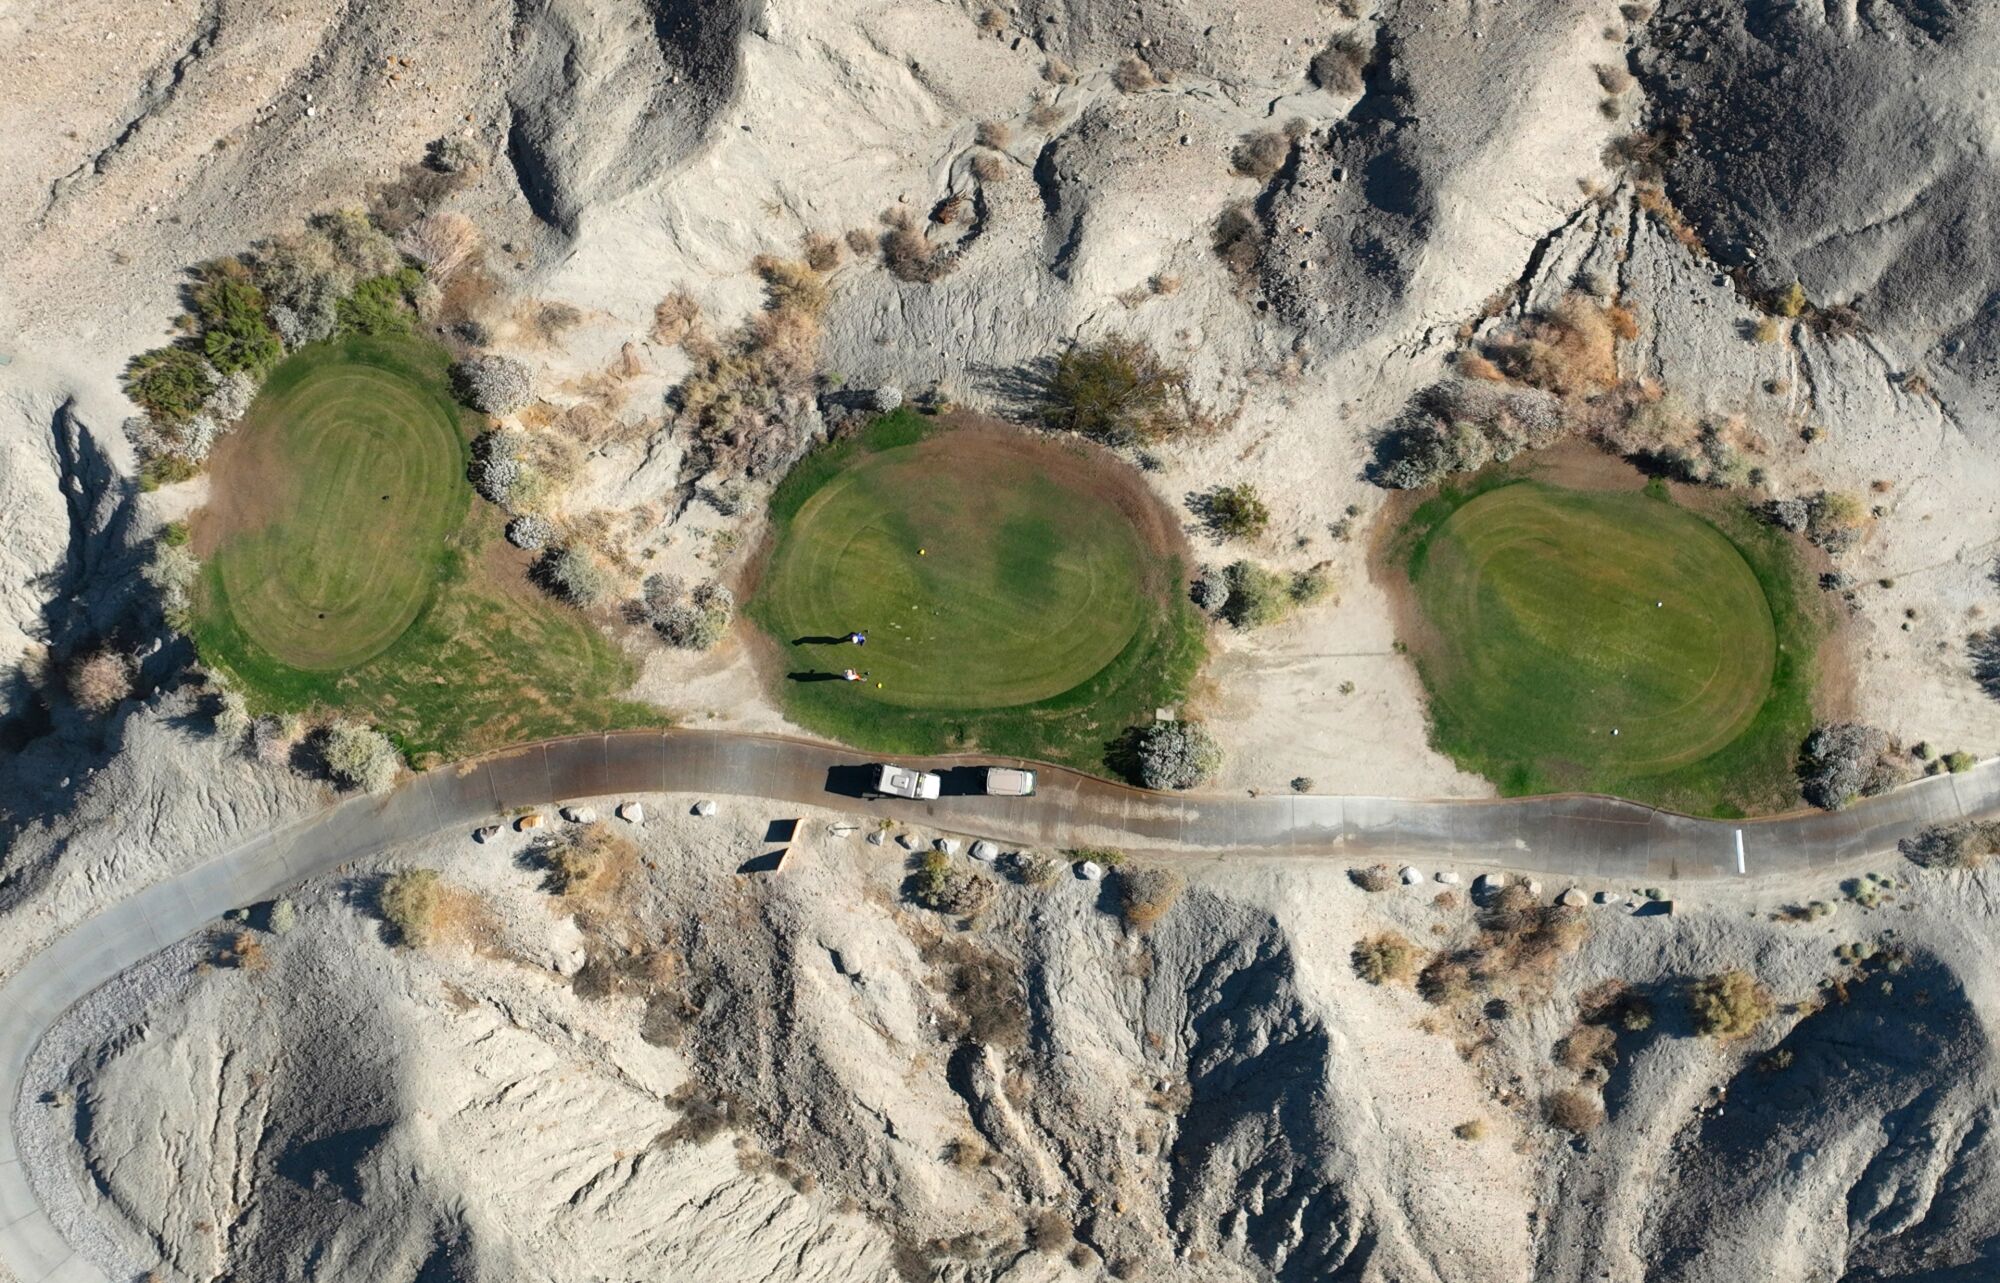 Golfing tee boxes are built into the desert